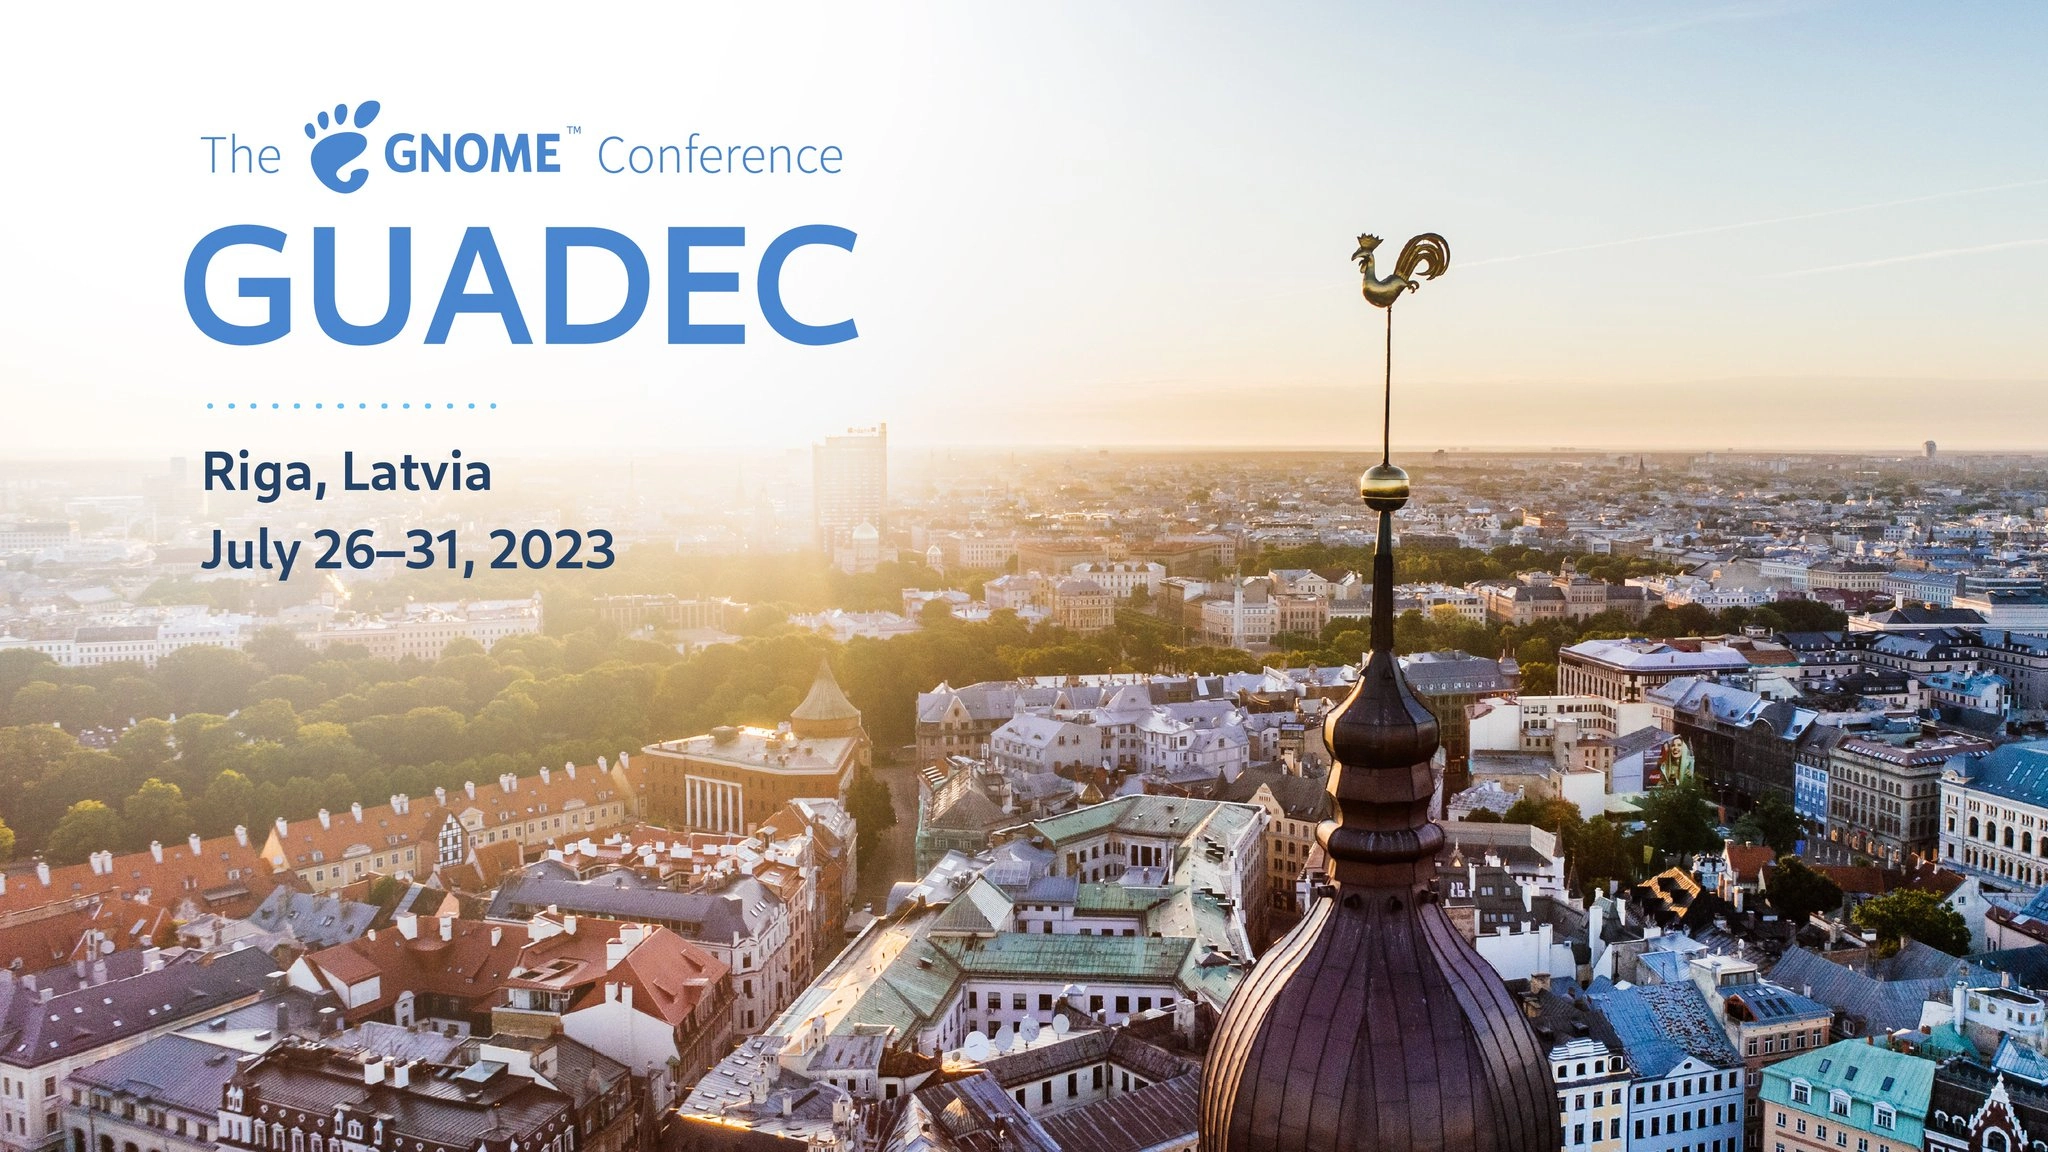 Registration is Now Open for GNOME’s GUADEC 2023 Event in Riga, Latvia